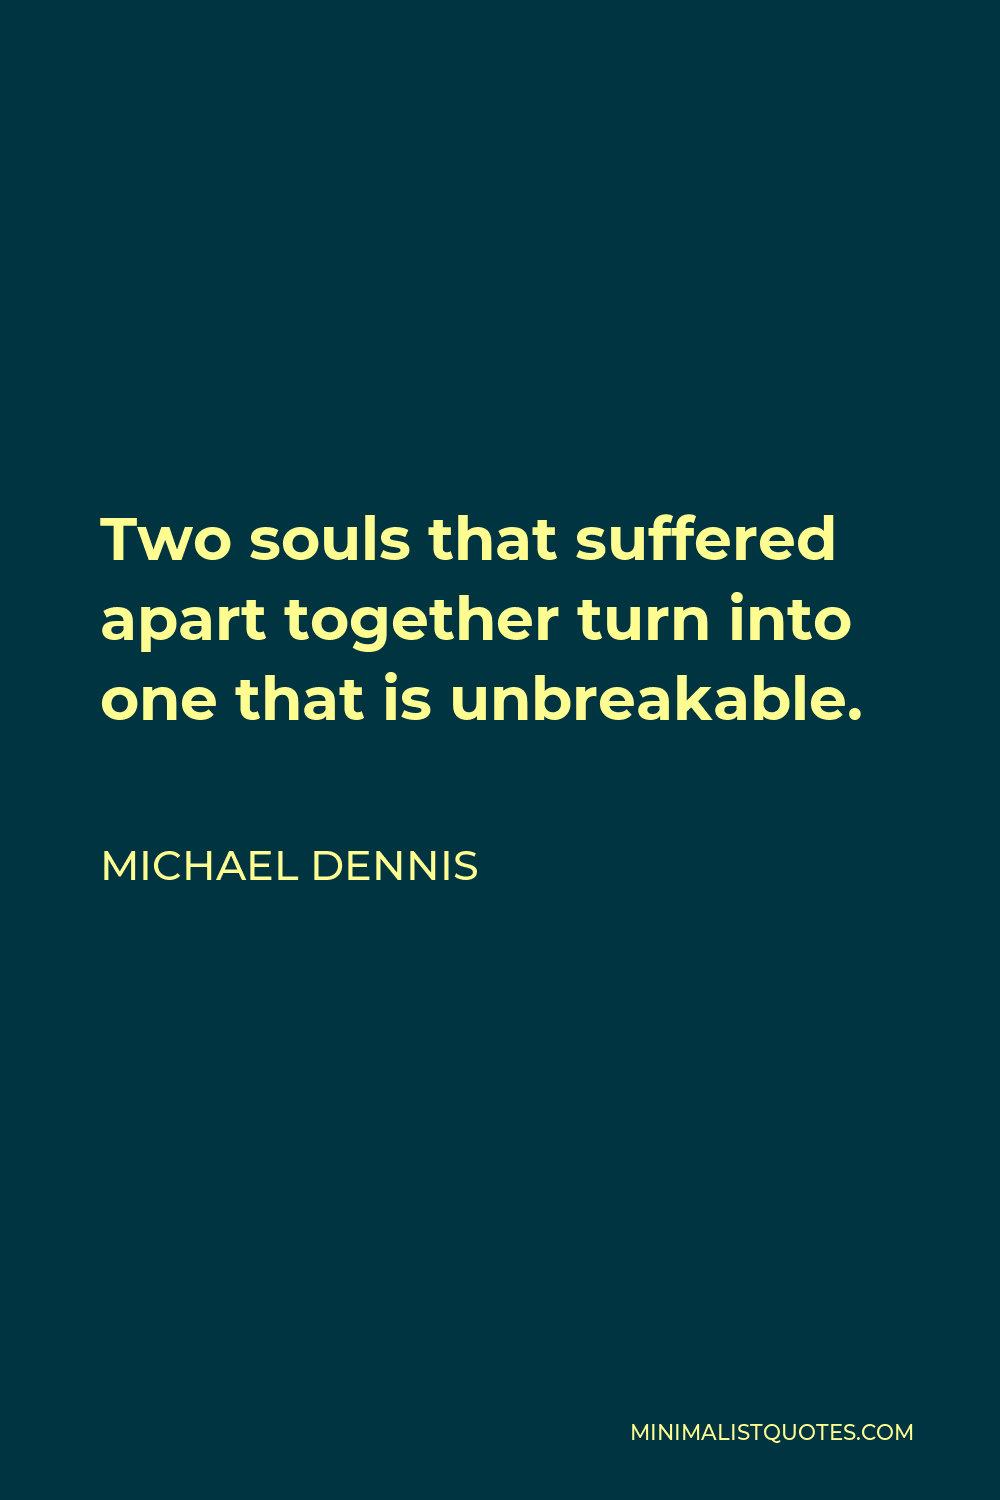 Michael Dennis Quote - Two souls that suffered apart together turn into one that is unbreakable.